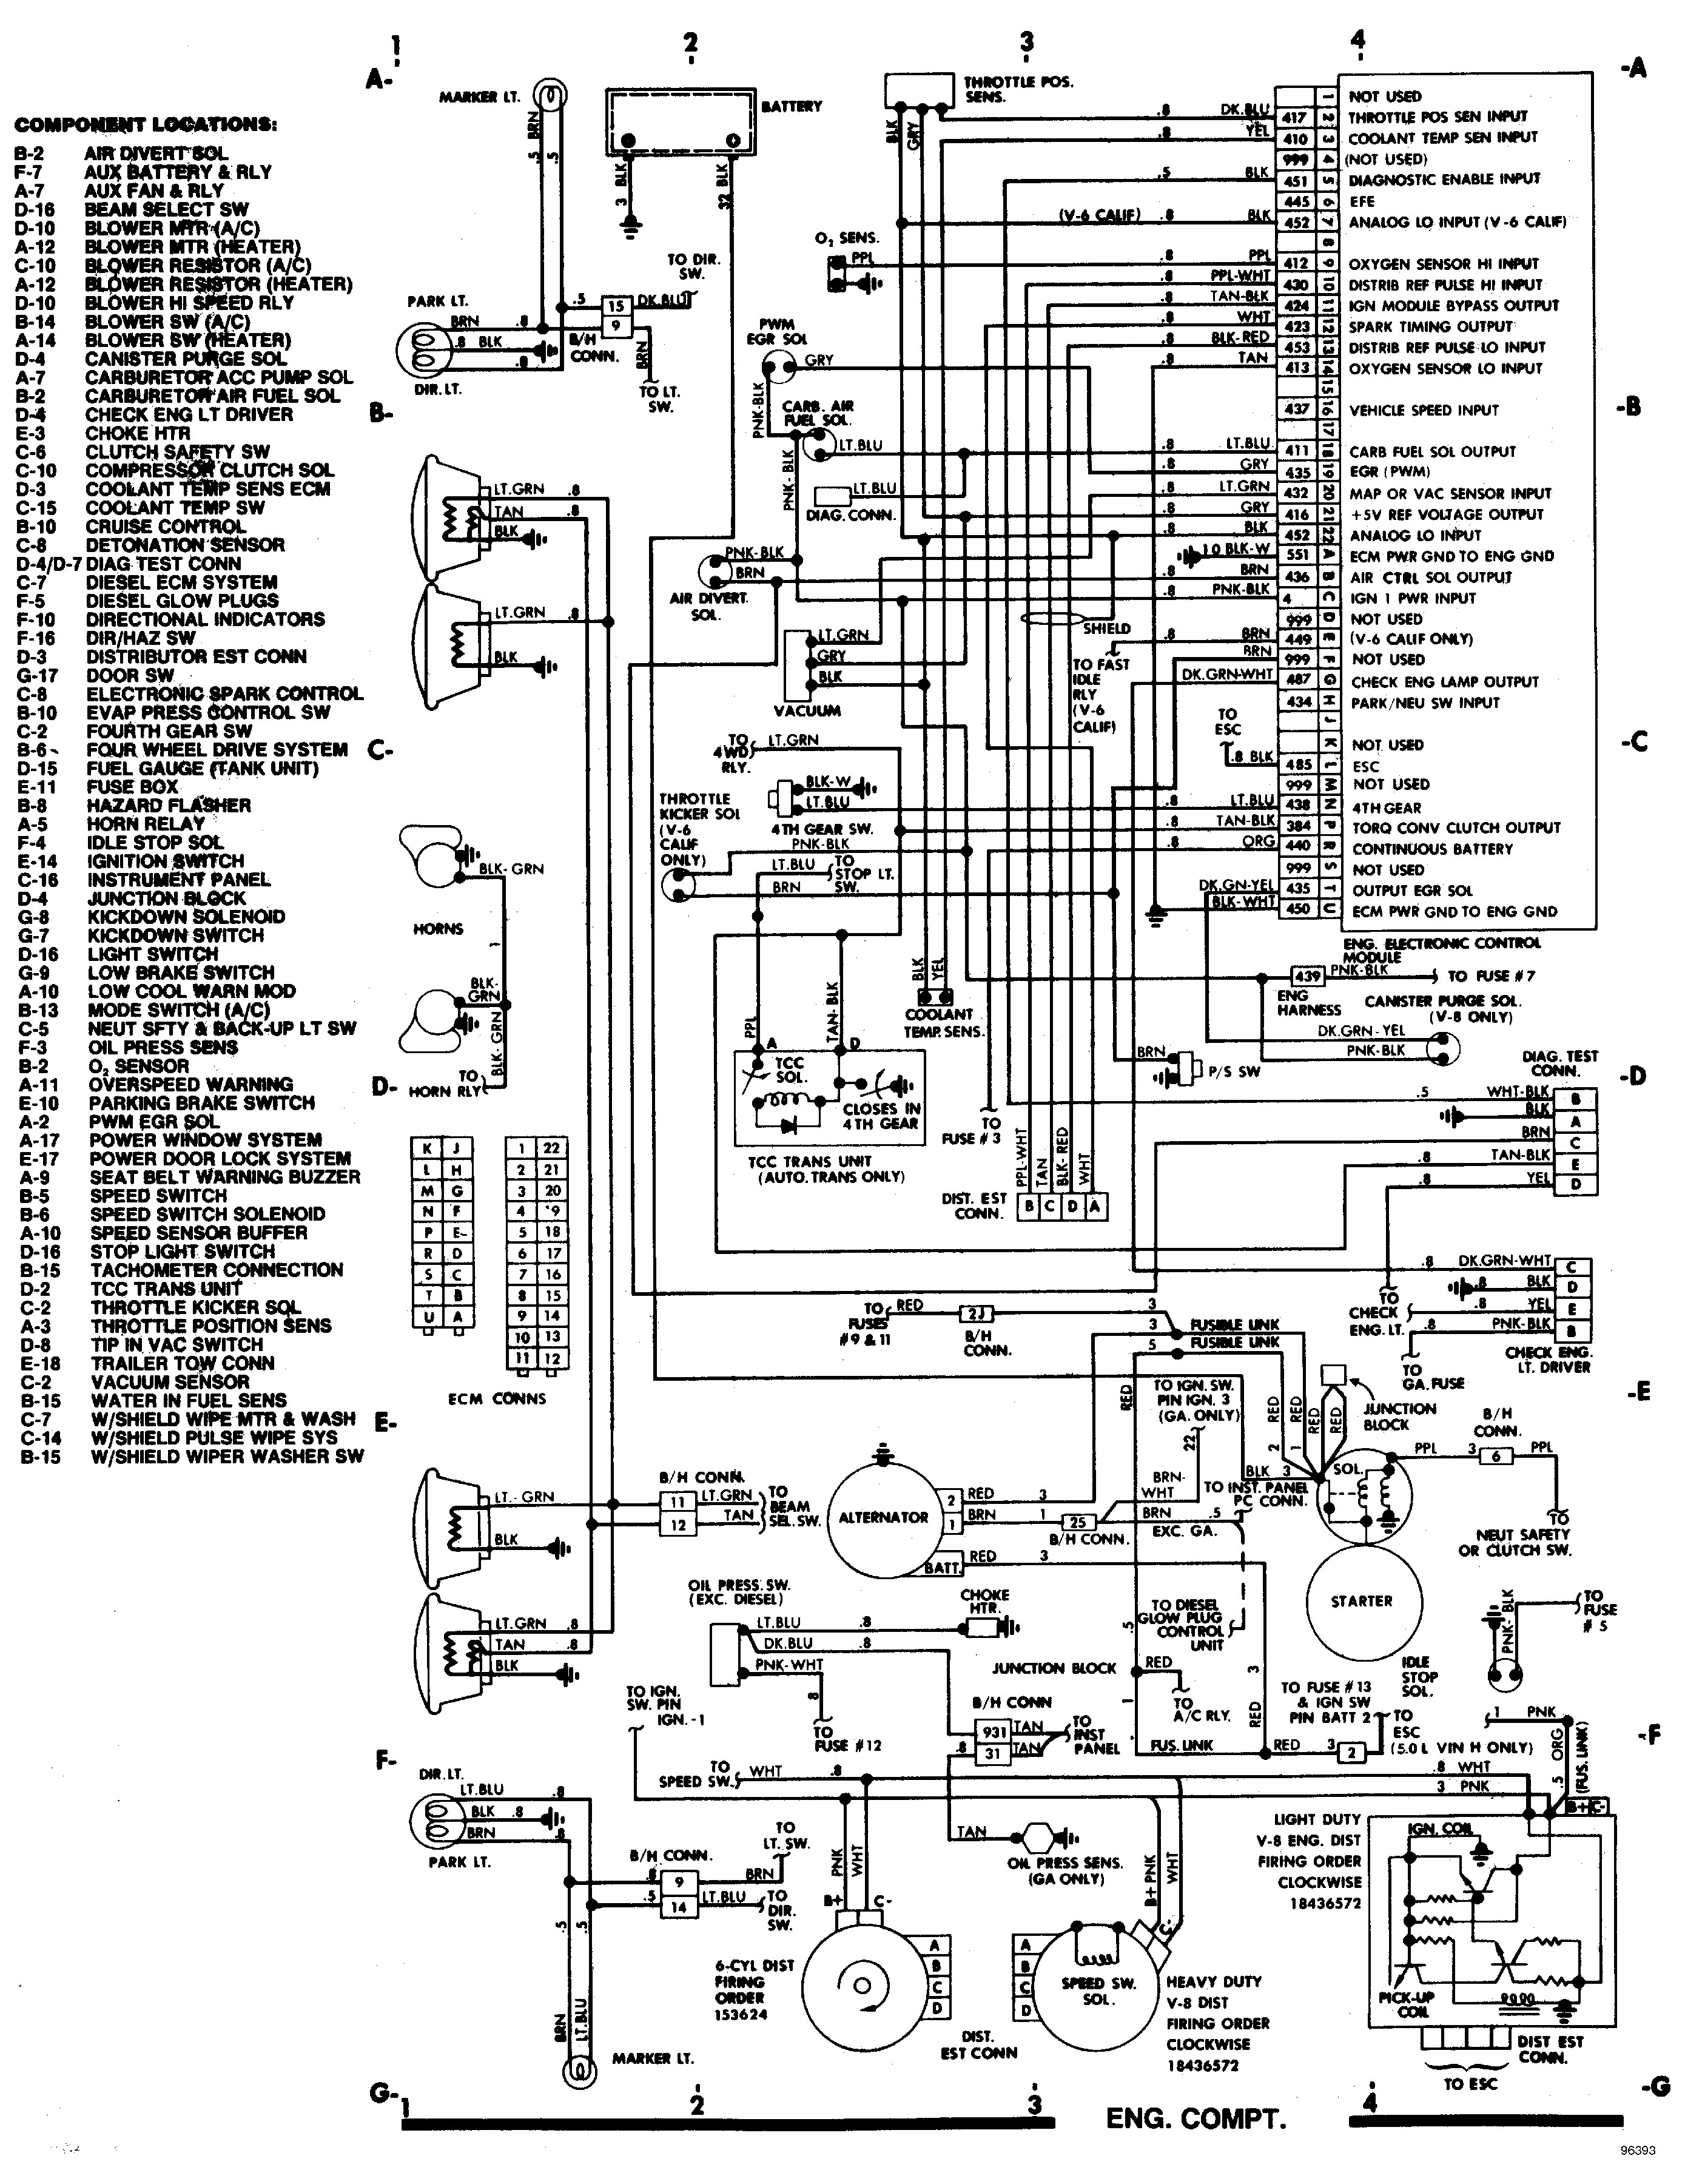 Electrical diagrams chevy only Page 2 chevy Pinterest